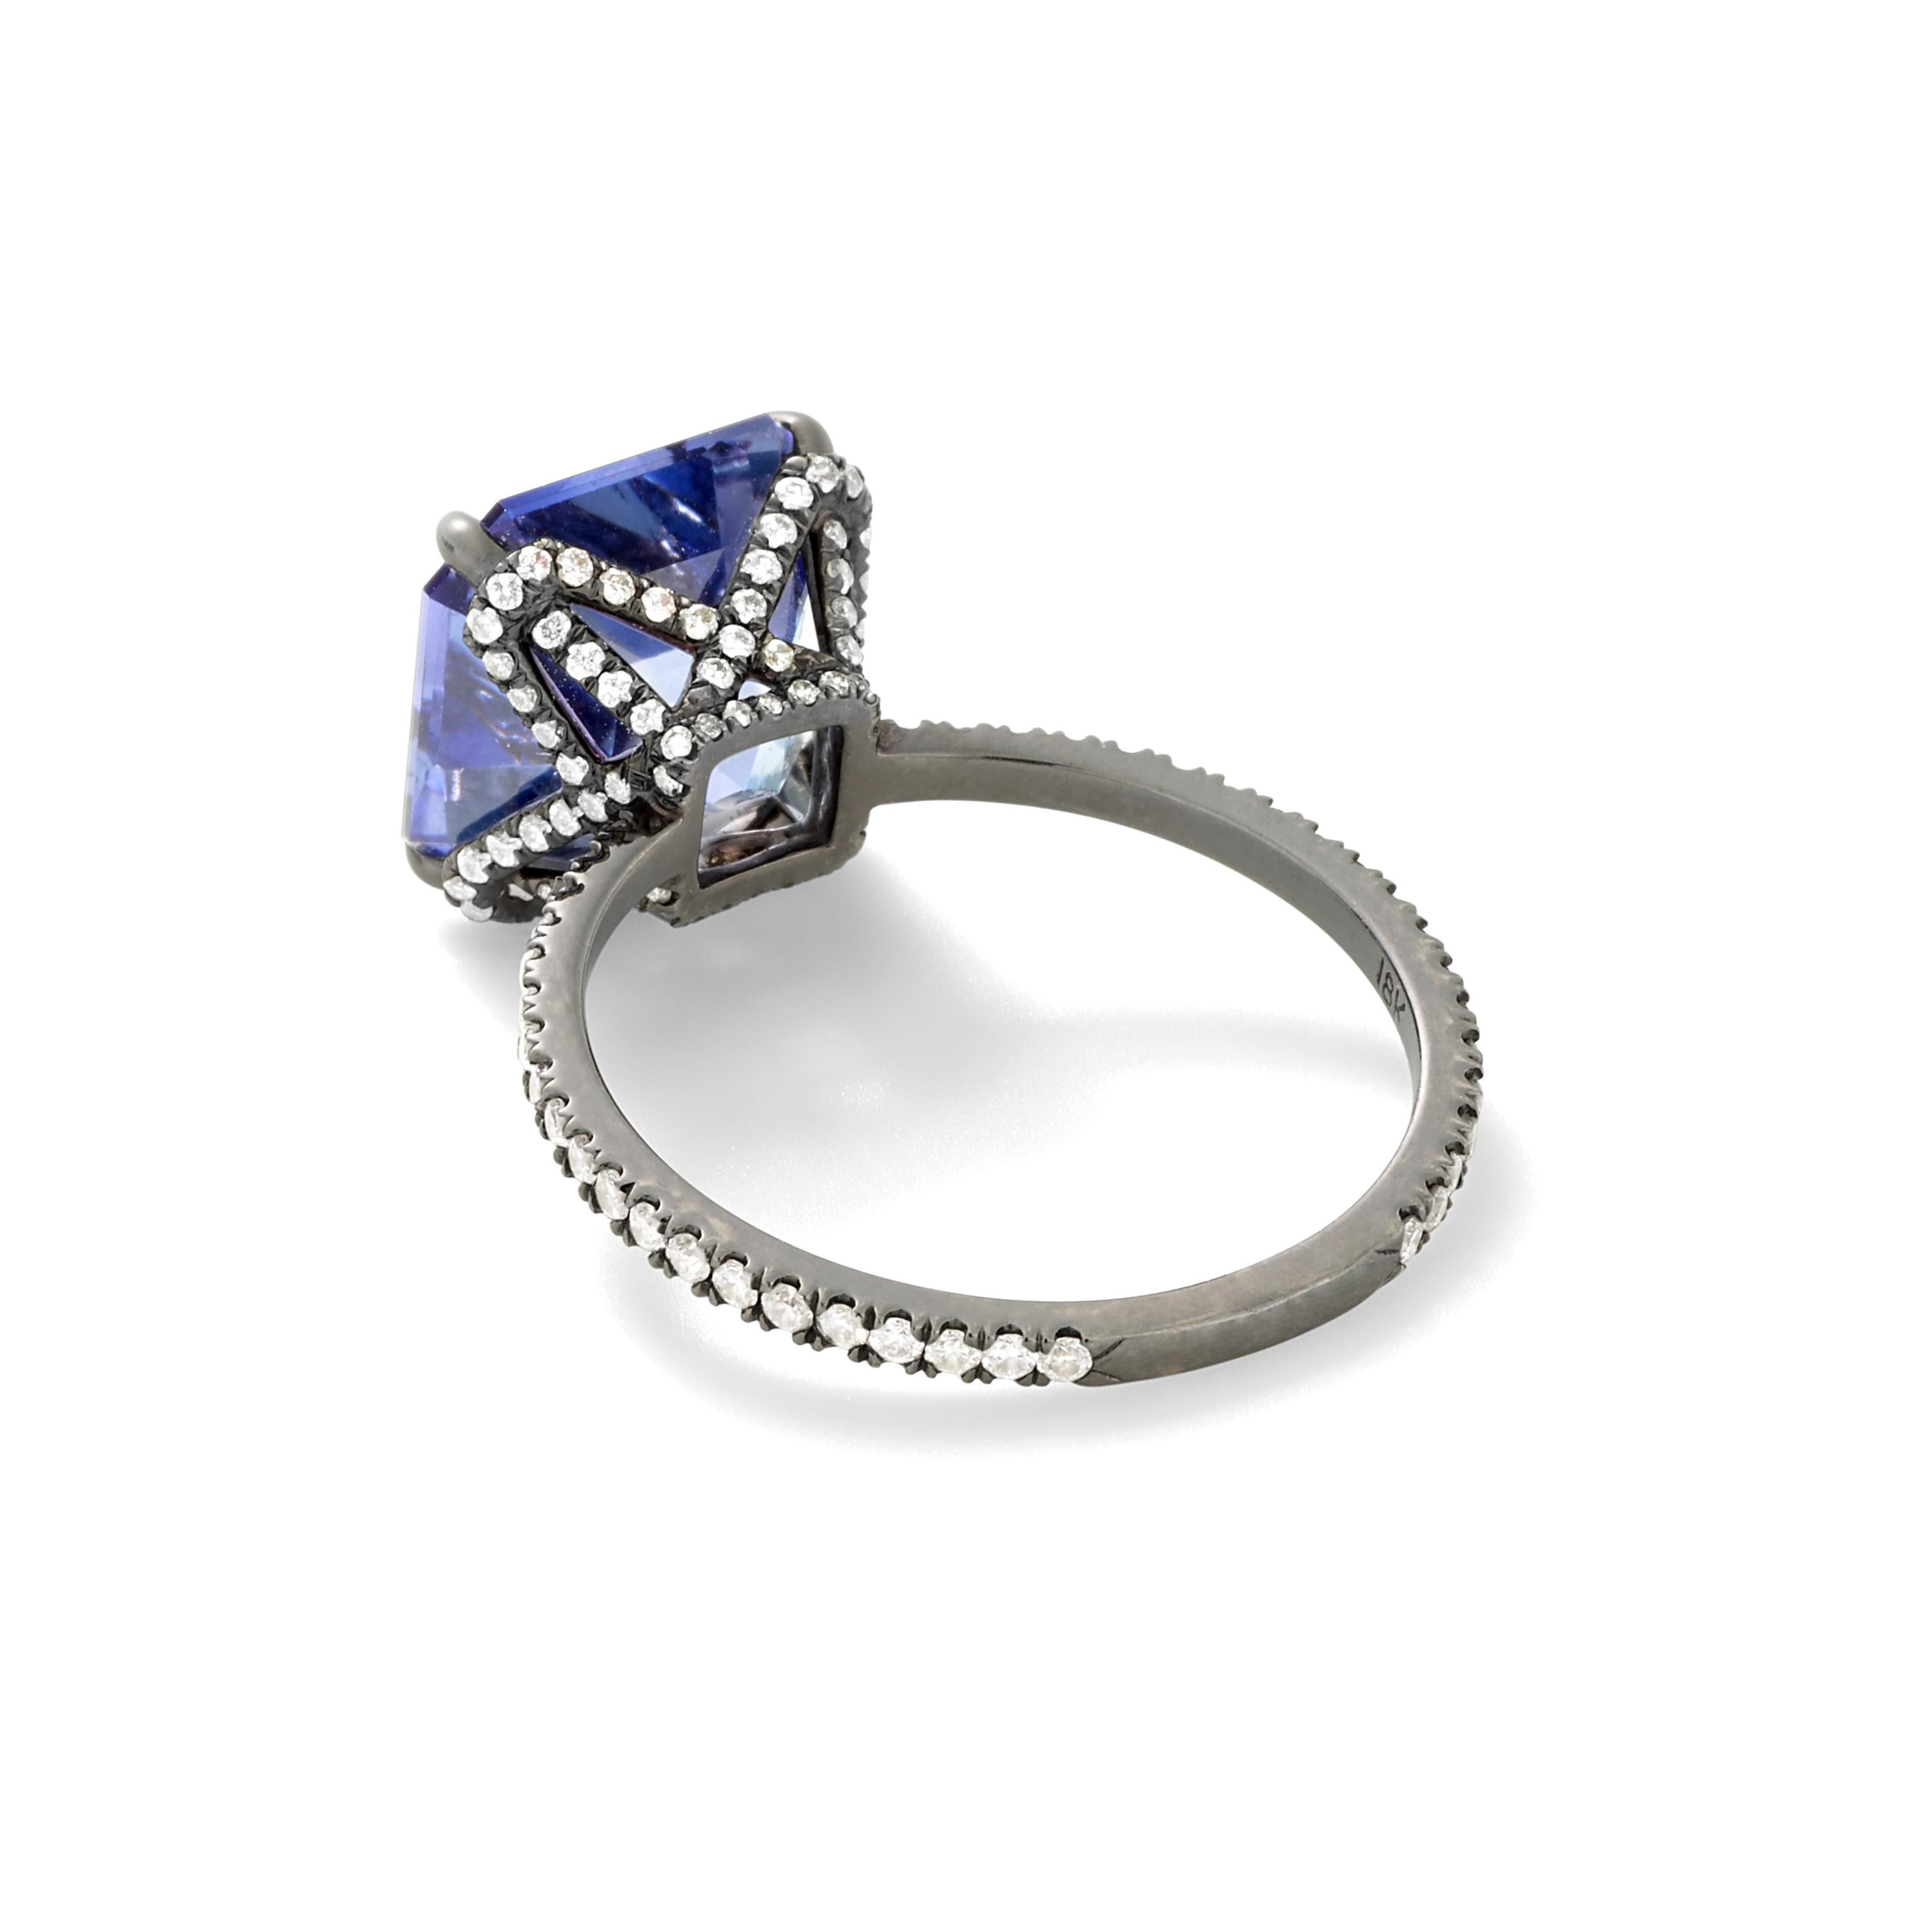 18k Blackened White Gold with 4.75 Ct Tanzanite and White Diamond Pavé - Size 6. 

Handmade in New York City.

Eva Fehren White, a bridal collection comprised of engagement rings and wedding bands, was launched in 2014, embodies the classic, yet